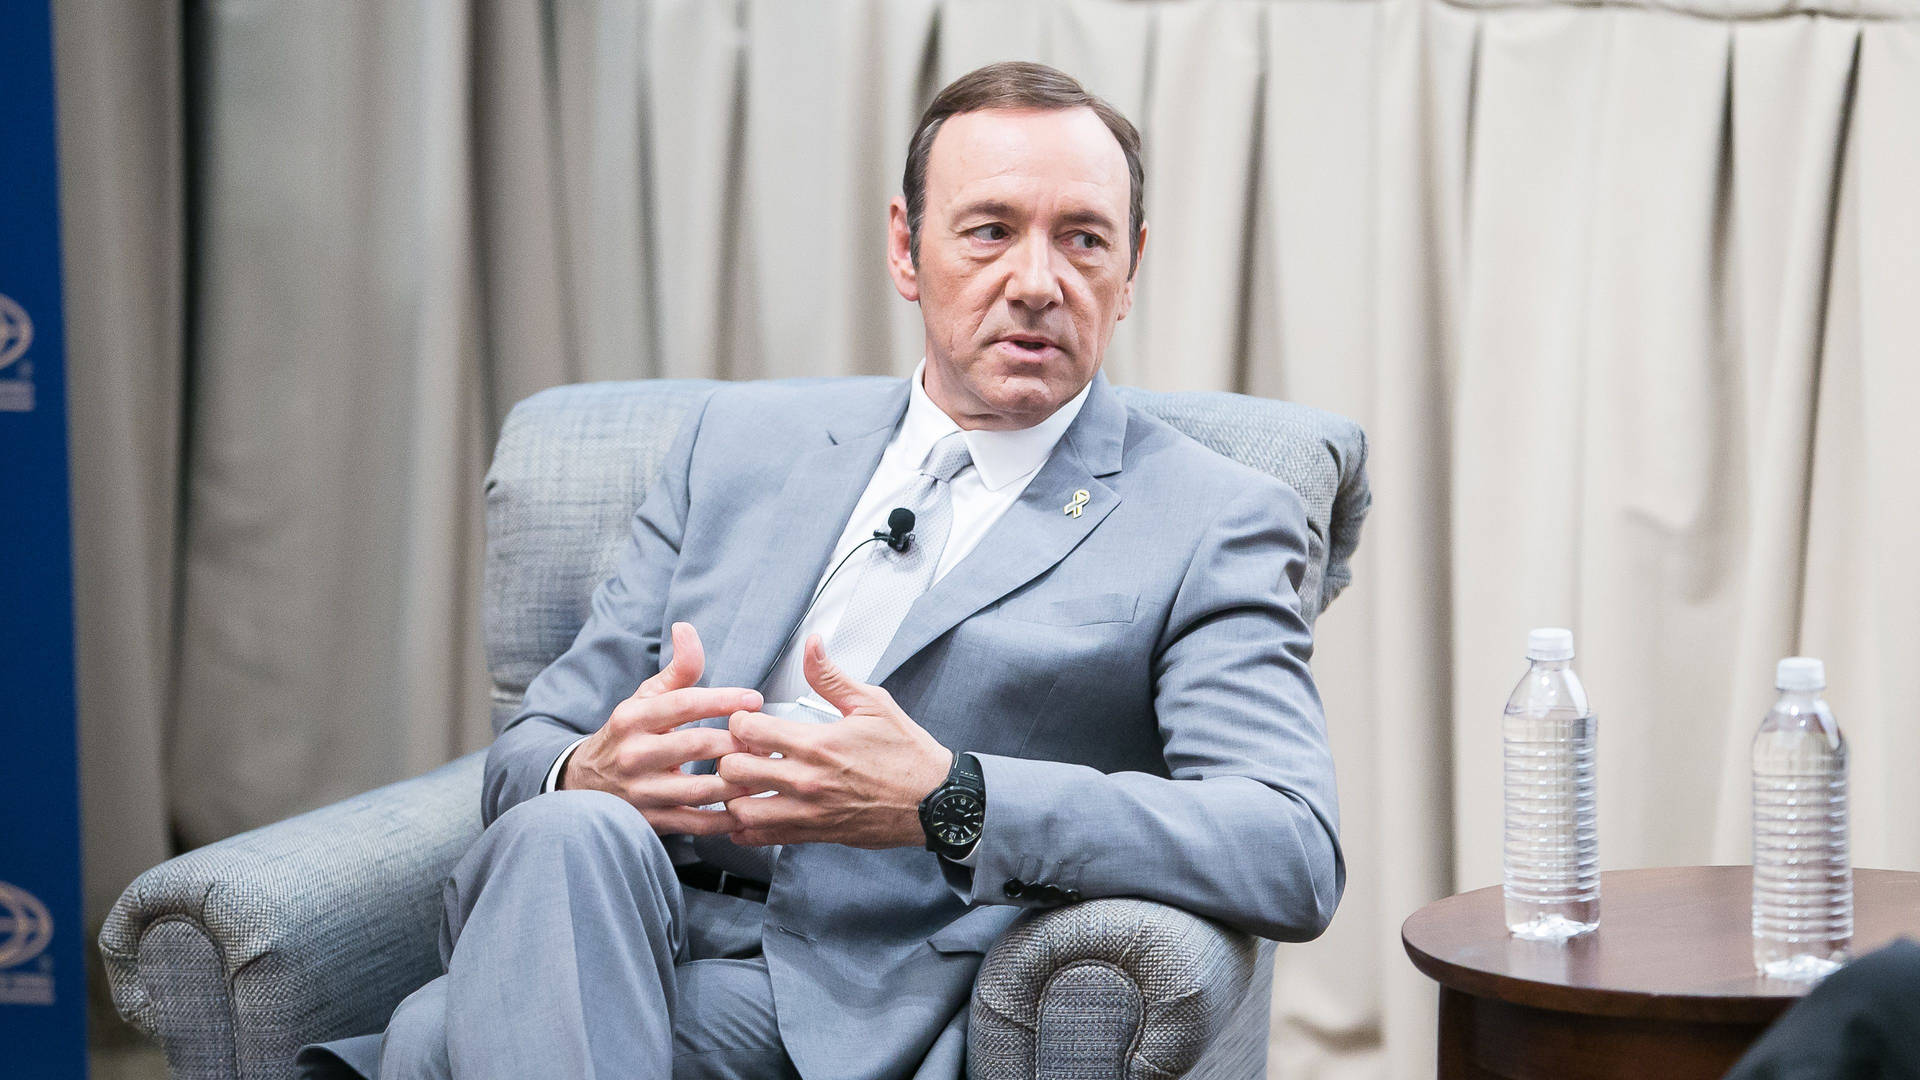 A Stolen Picture Of Kevin Spacey Wallpaper